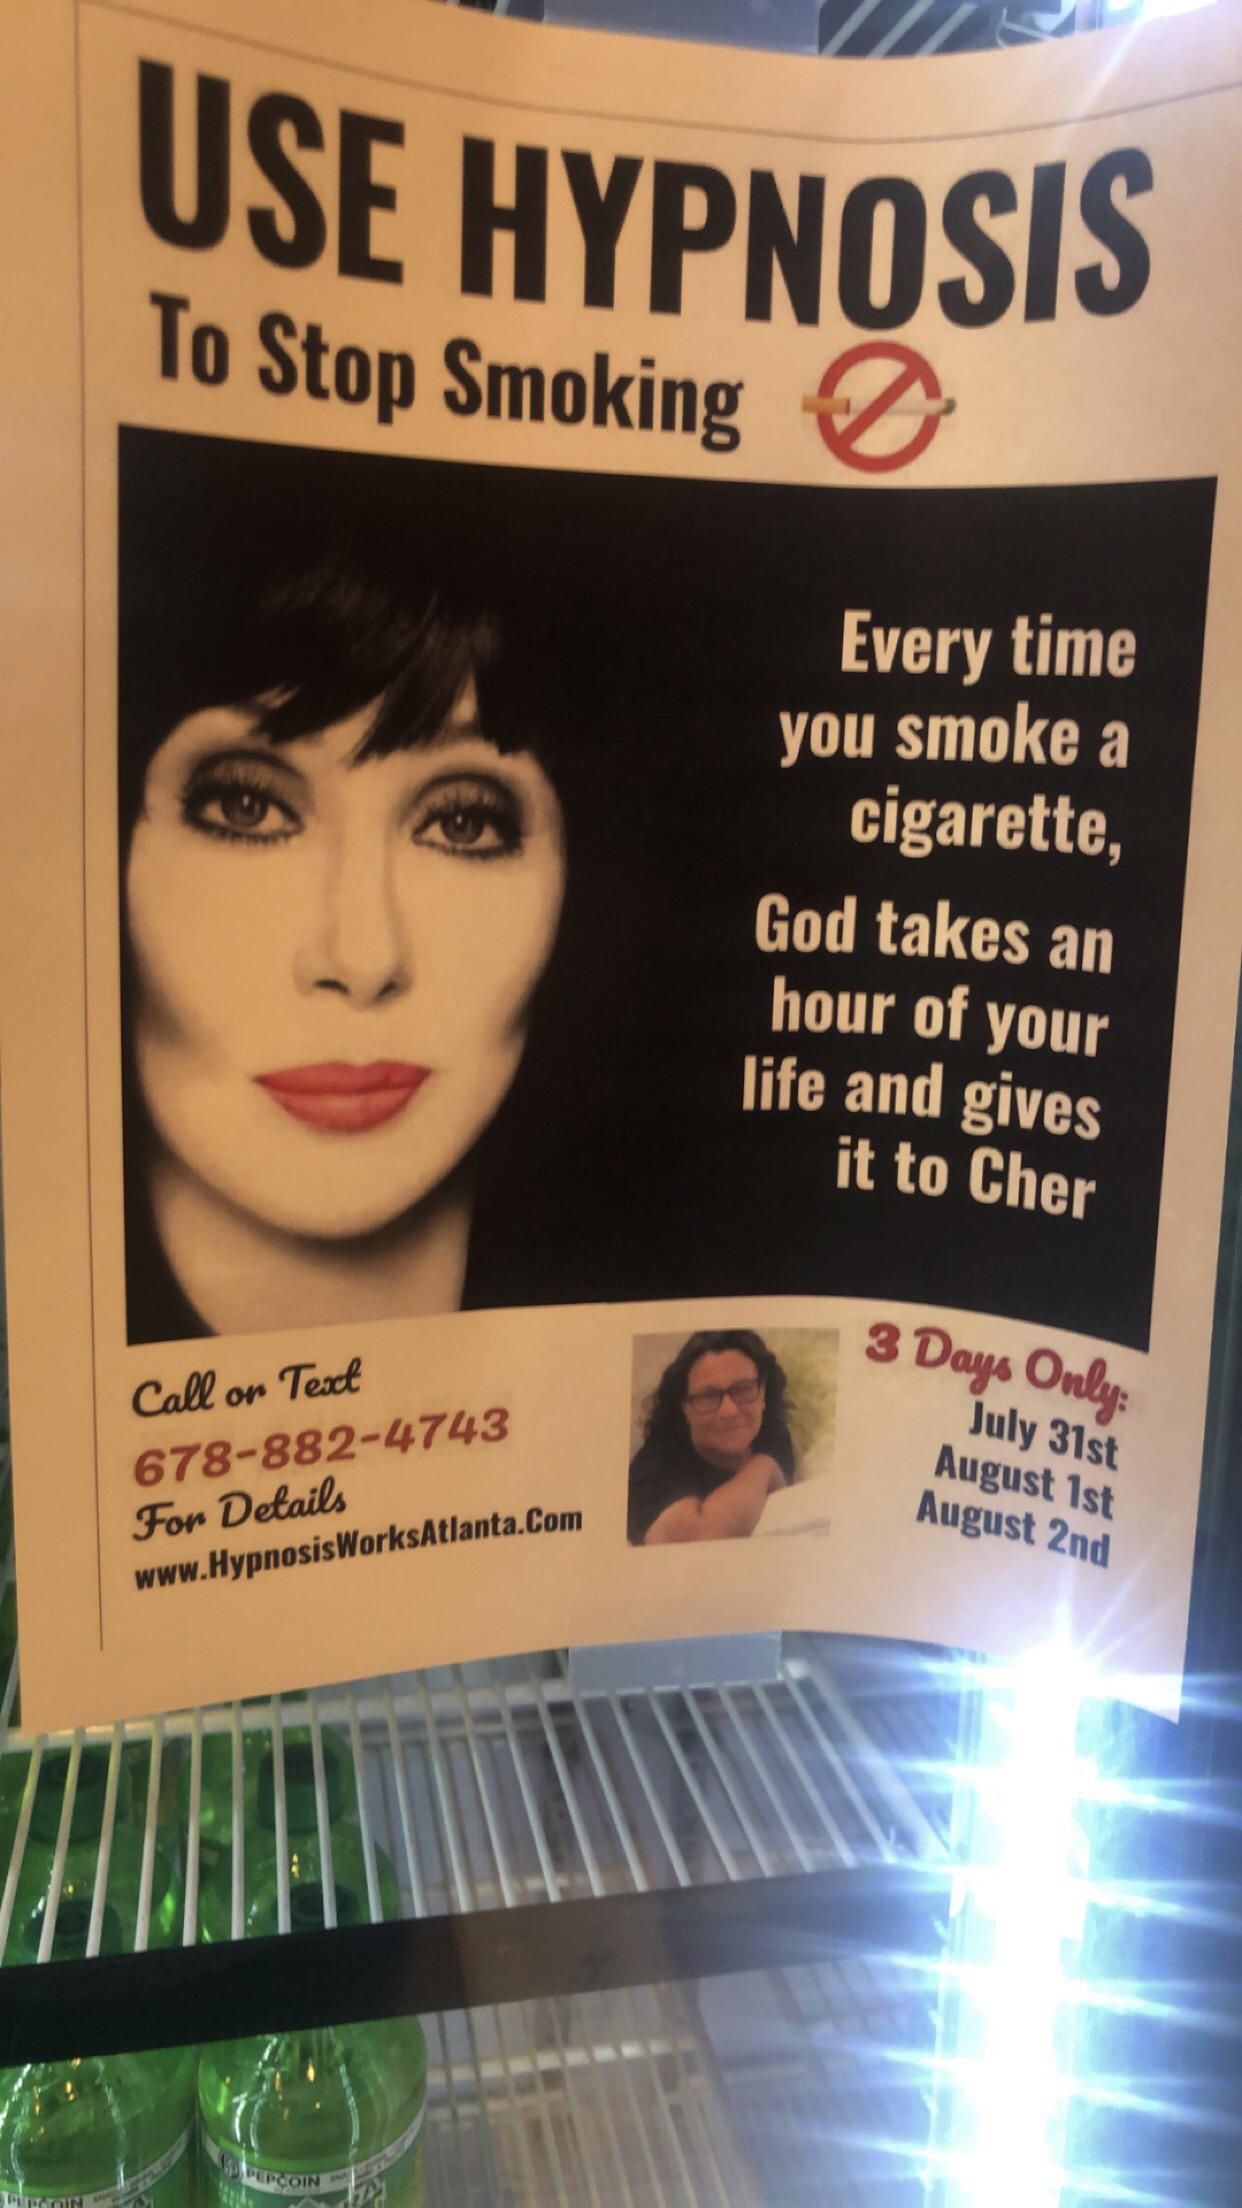 This flyer